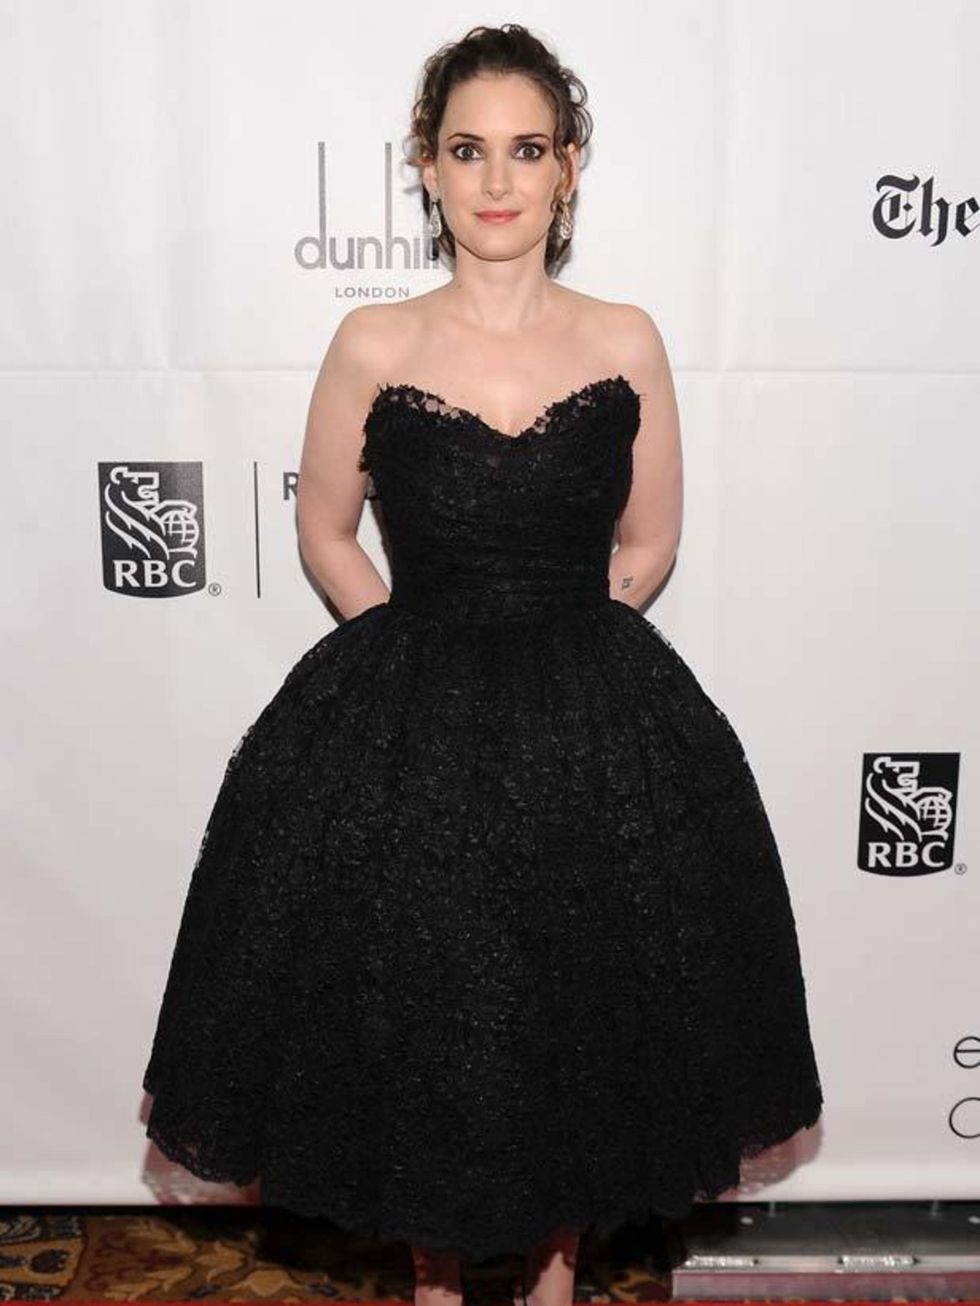 <p>Winona Ryder in <a href="http://www.elleuk.com/catwalk/collections/dolce-gabbana/spring-summer-2011">Dolce &amp; Gabbana</a> at IFP's 20th Anniversary Gotham Independent Film Awards in New York, 29 November 2010</p>